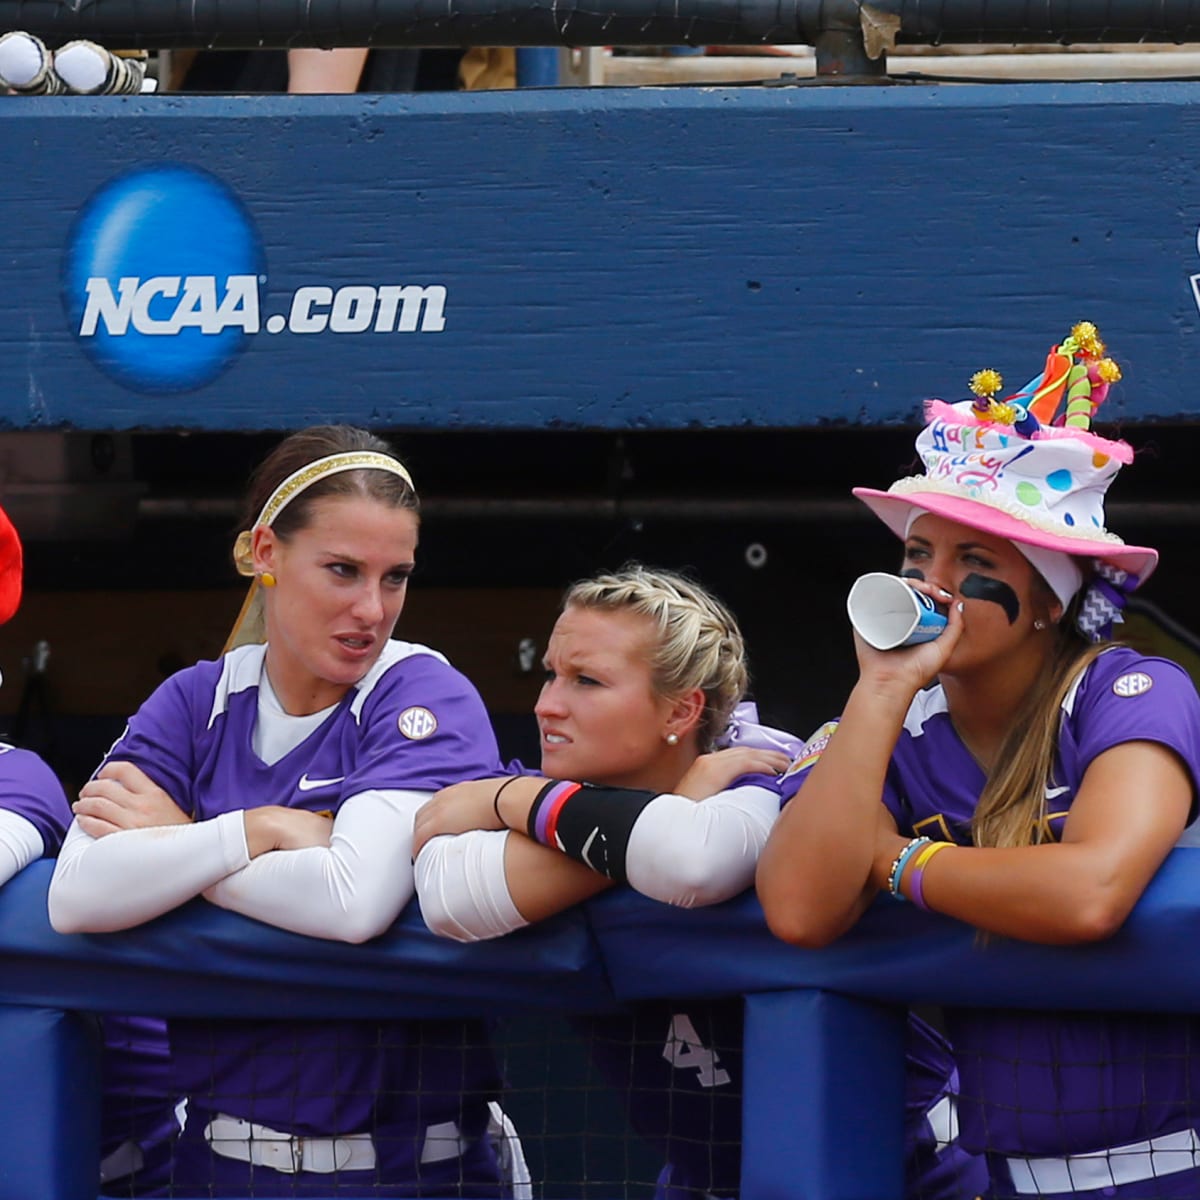 The Rally Cap crew spices things up with @lsusoftball by trying out some  Tajin 🌶️